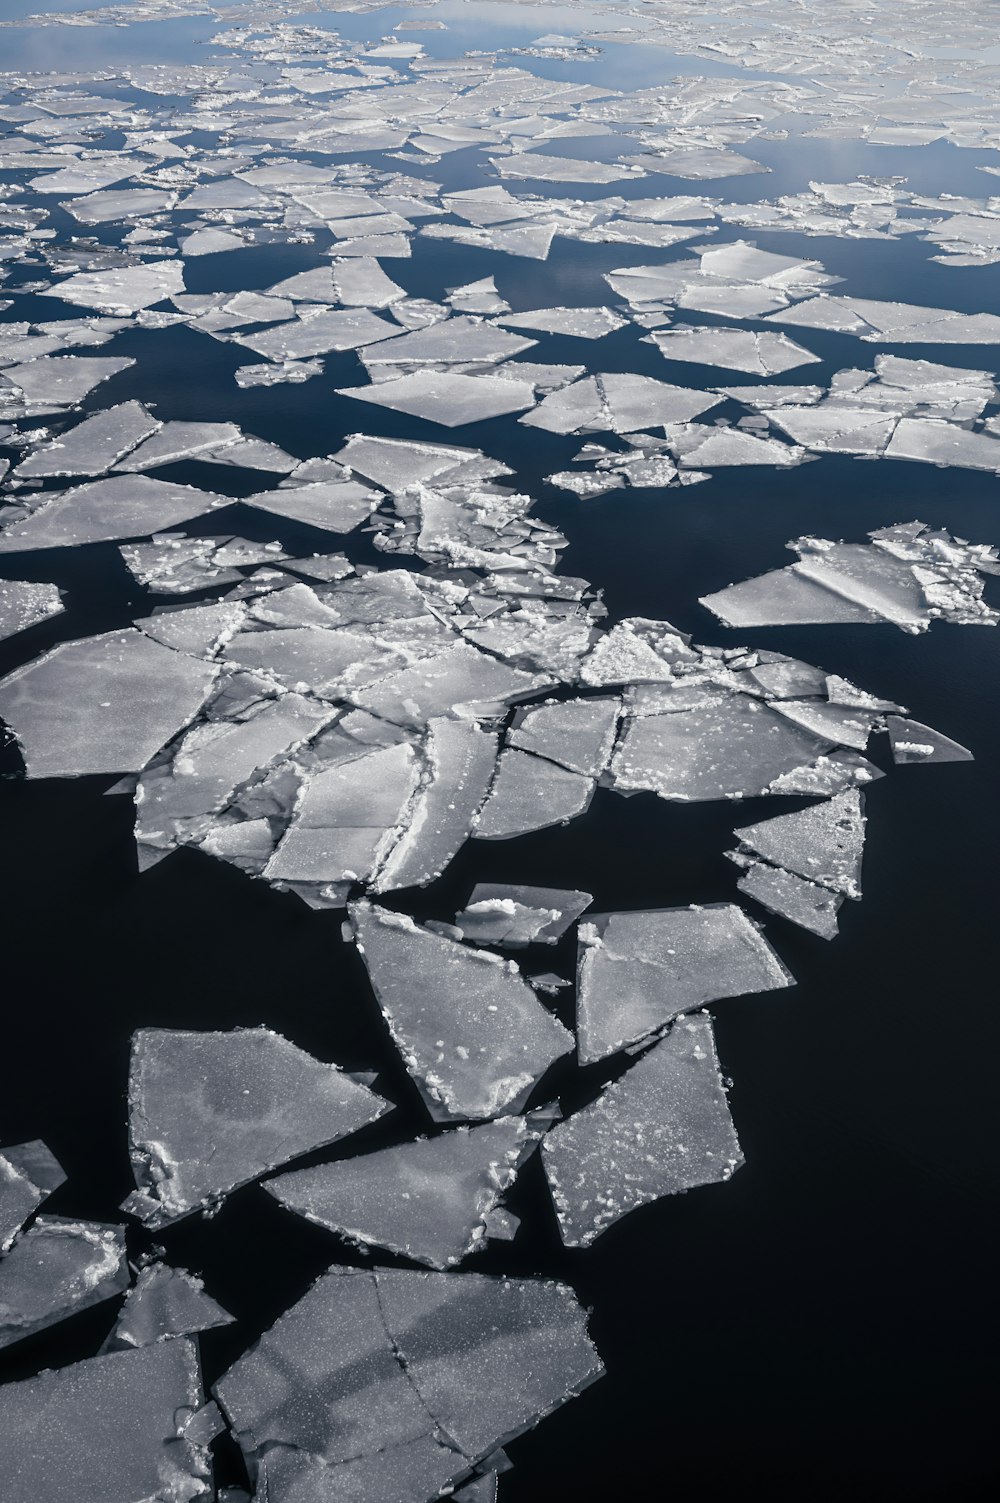 an aerial view of ice floes in the ocean